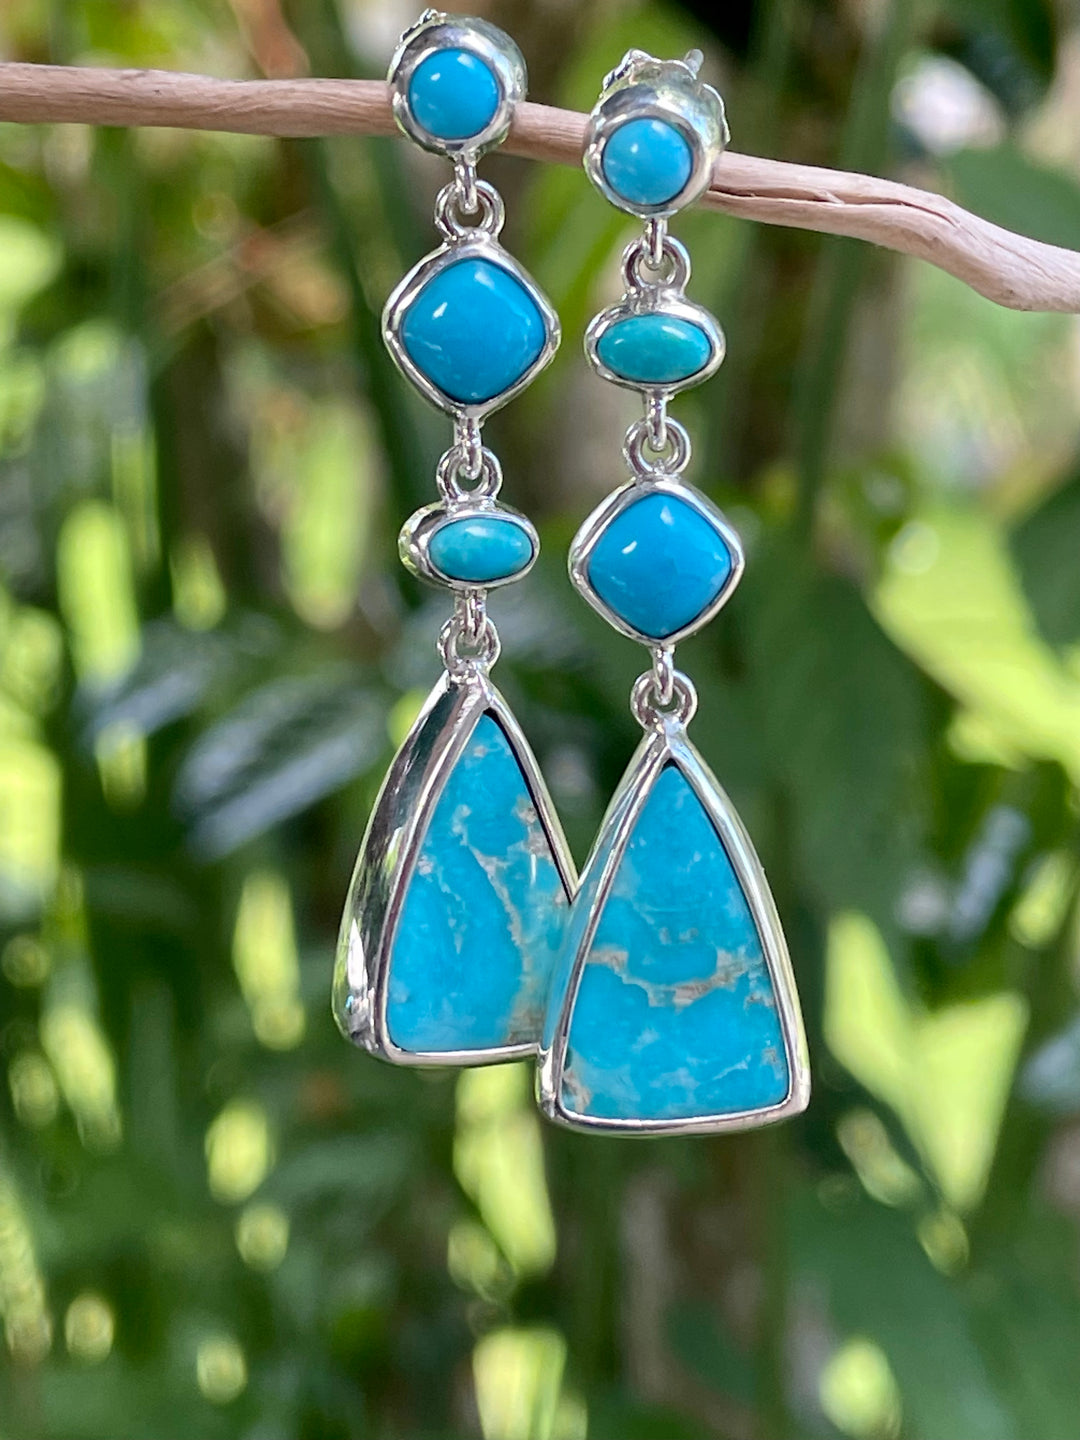 Turquoise wild at heart earrings